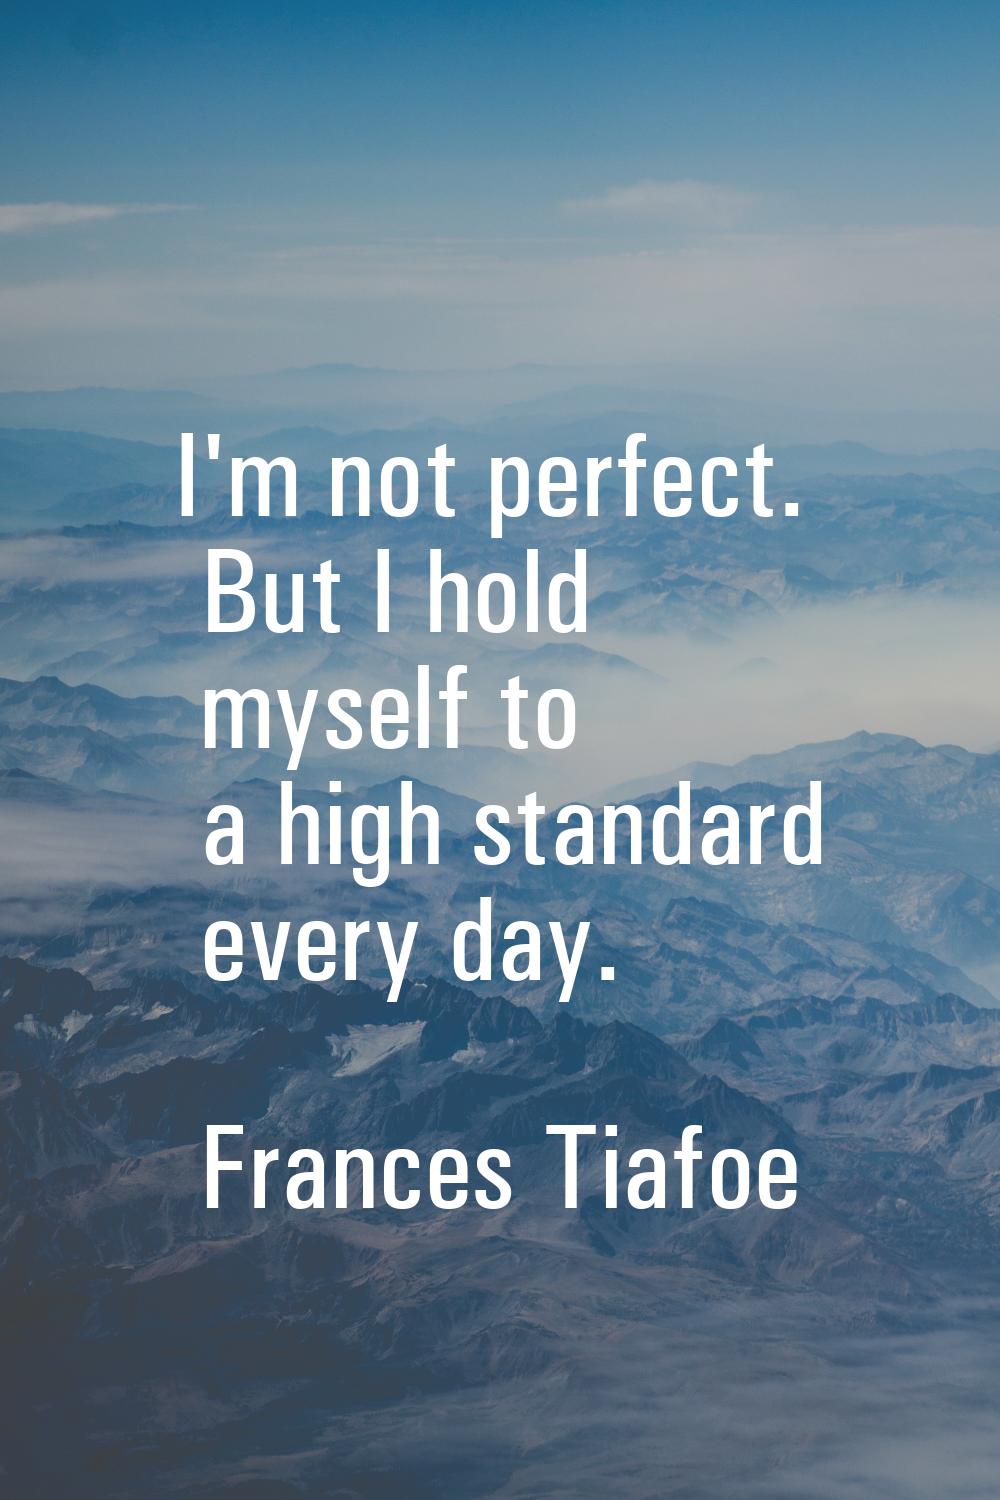 I'm not perfect. But I hold myself to a high standard every day.